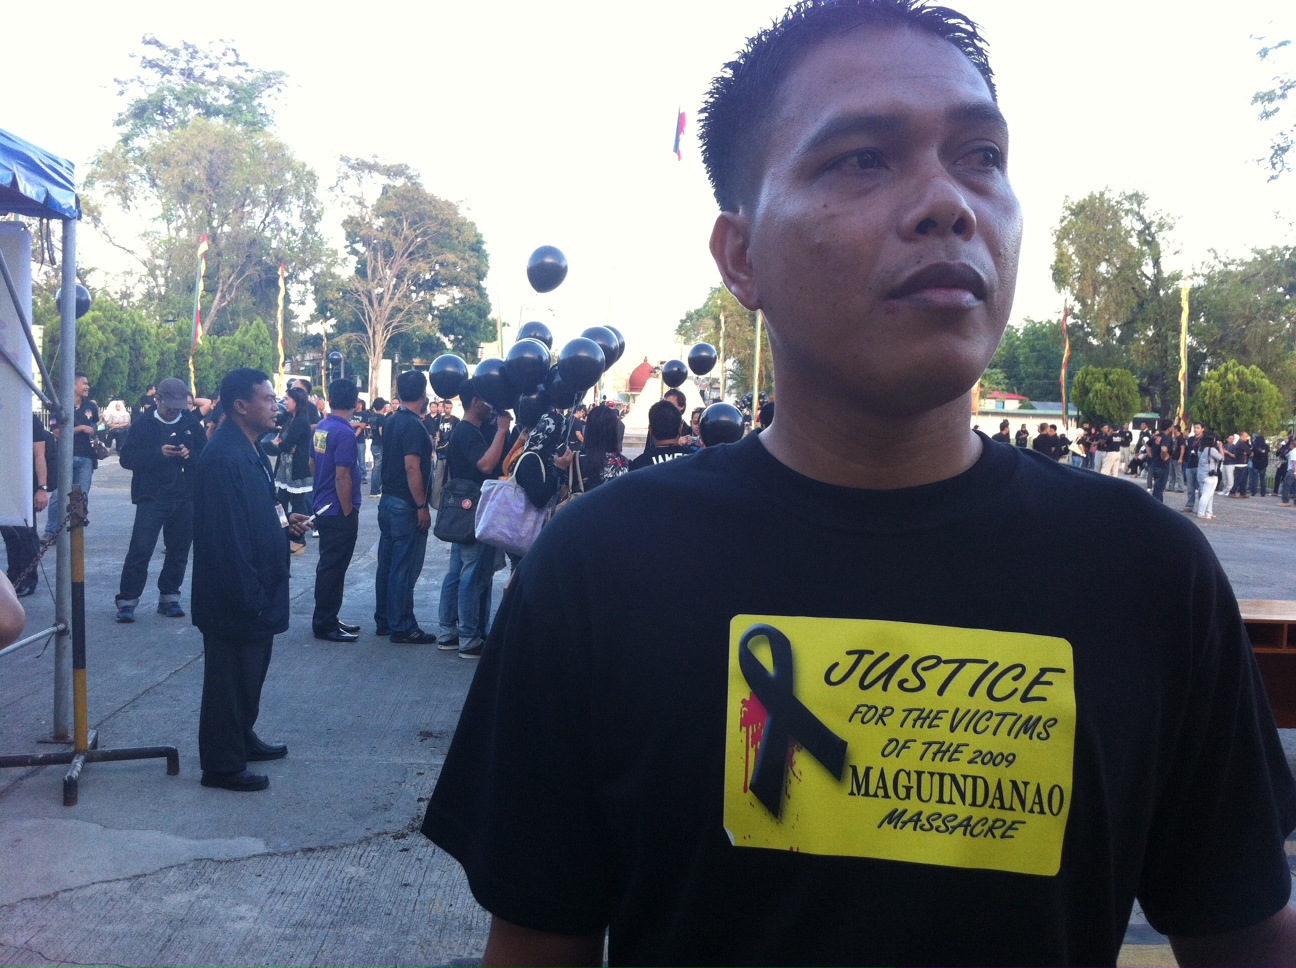 JUSTICE FOR THE VICTIMS. Attendees of the commemoration wore shirts that asked for justice for the victims of the Maguindanao massacre that left 58 dead, 32 of whom were journalists. Photo by Ferdinandh Cabrera.